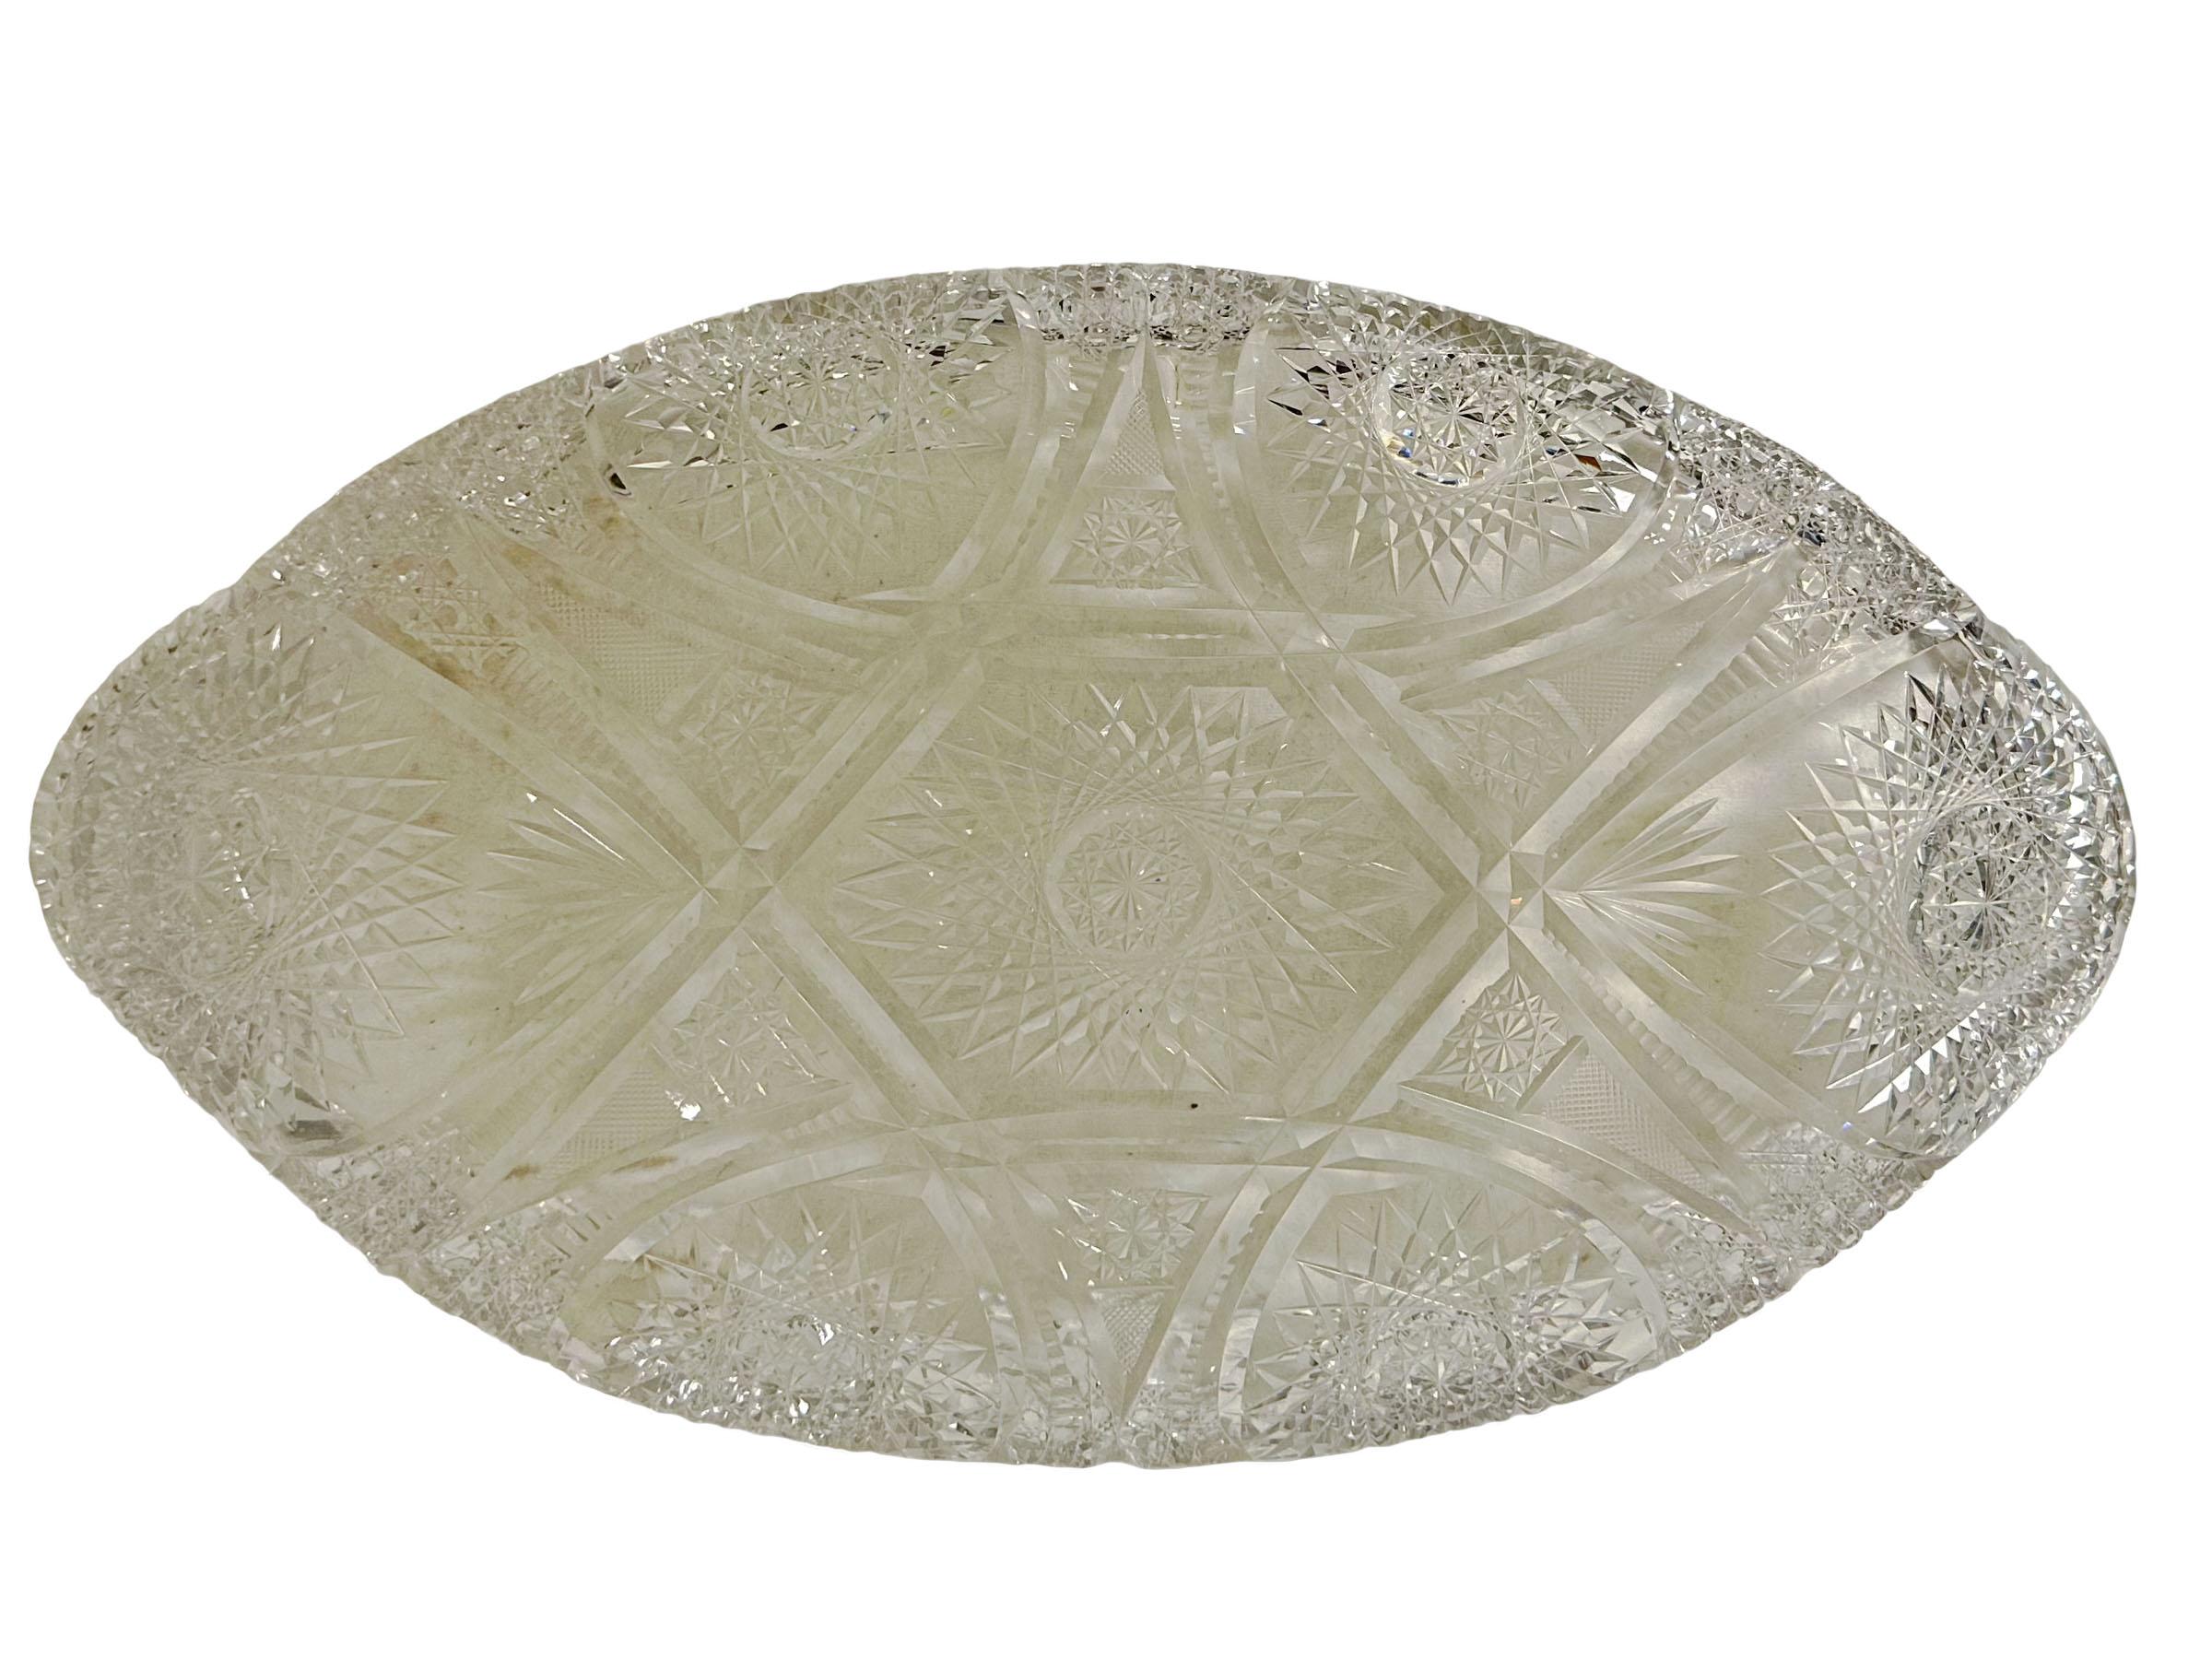 Late 19th Century Antique Cut Glass Bowl For Sale